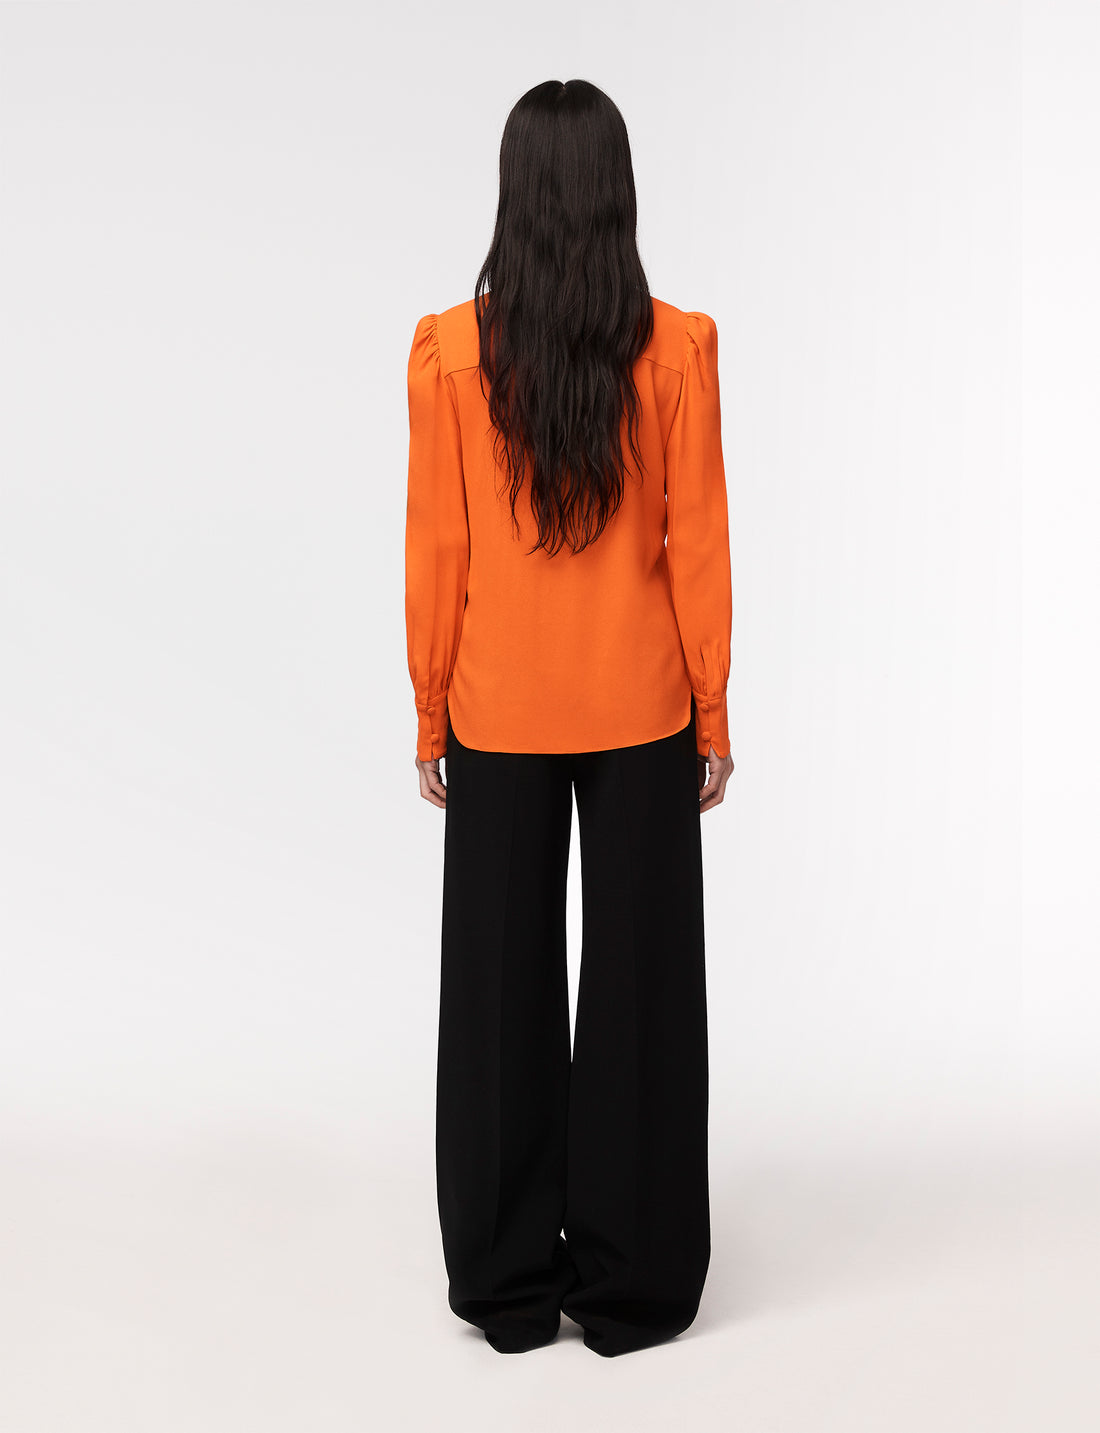 Product image8 with color tangerine